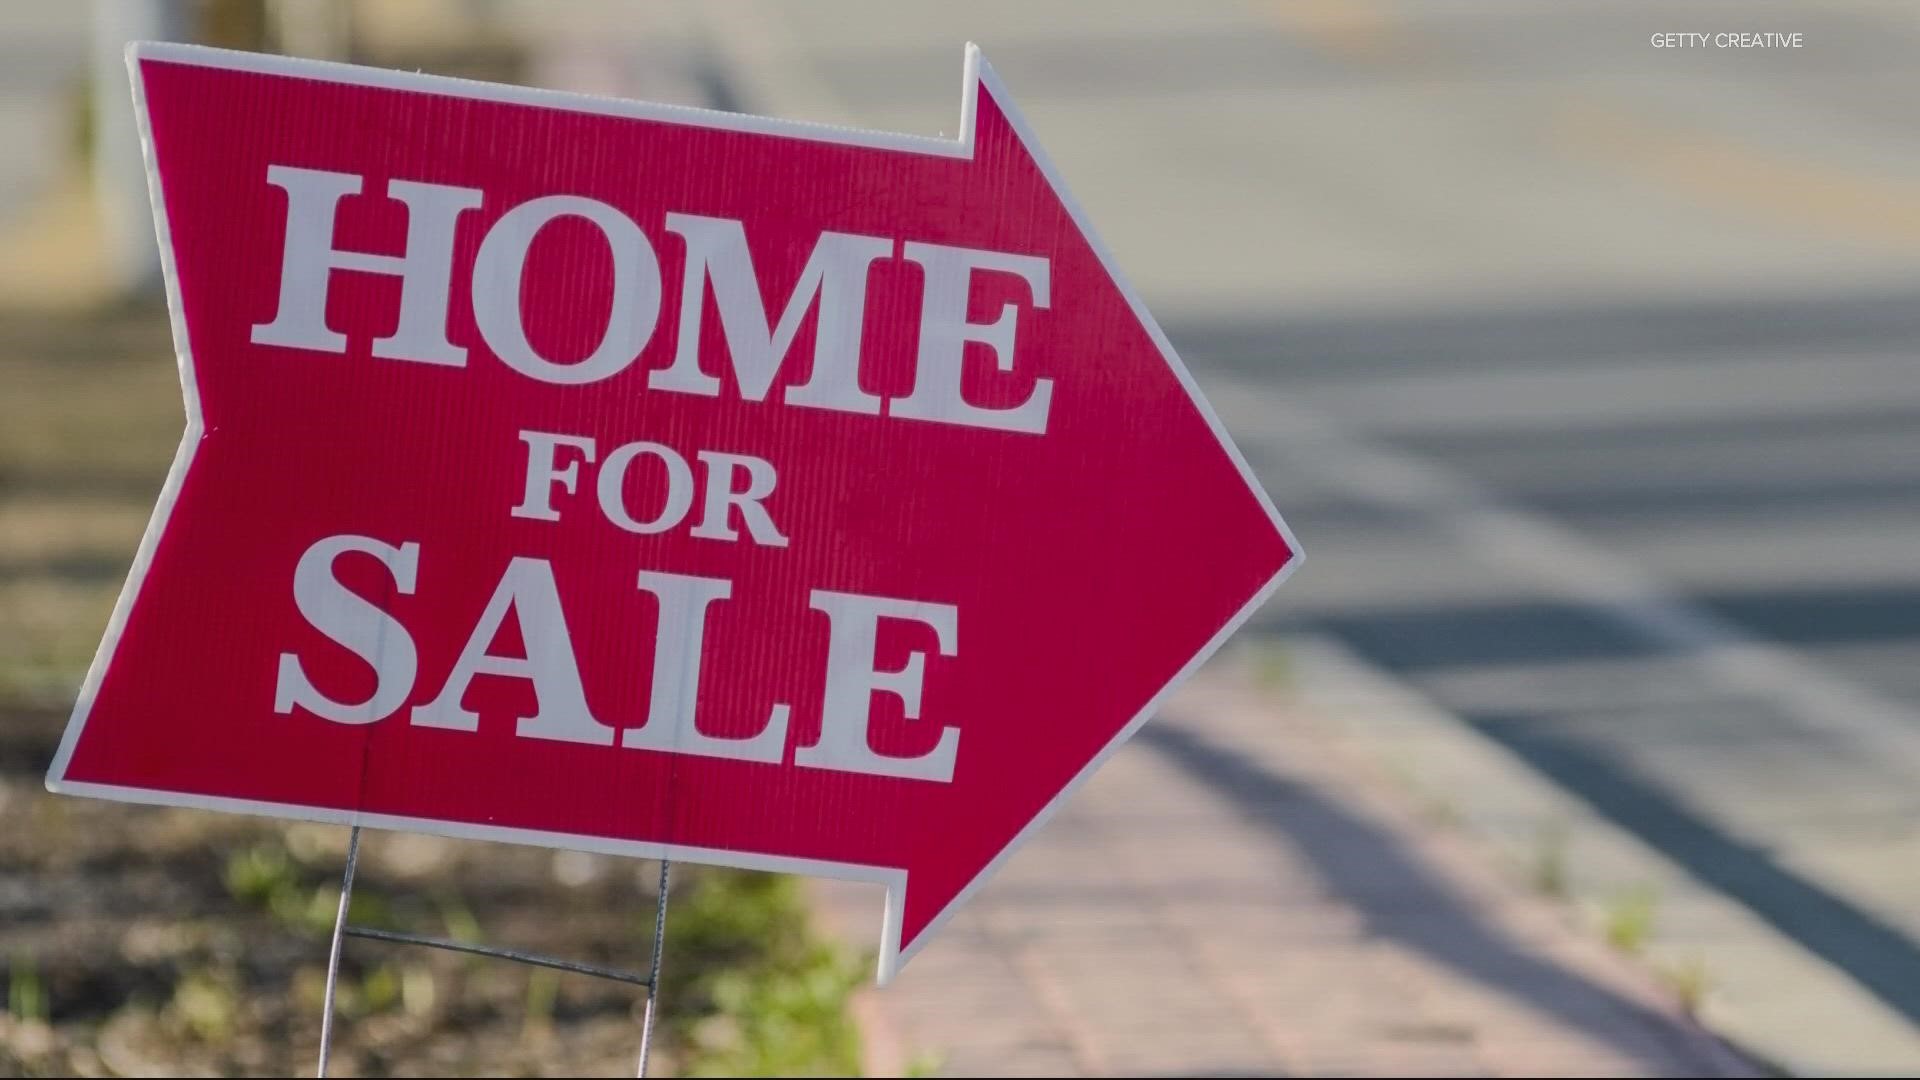 KGW had a chance to connect with a few housing market experts on the trends and future changes affecting the market in the Portland Metro area.